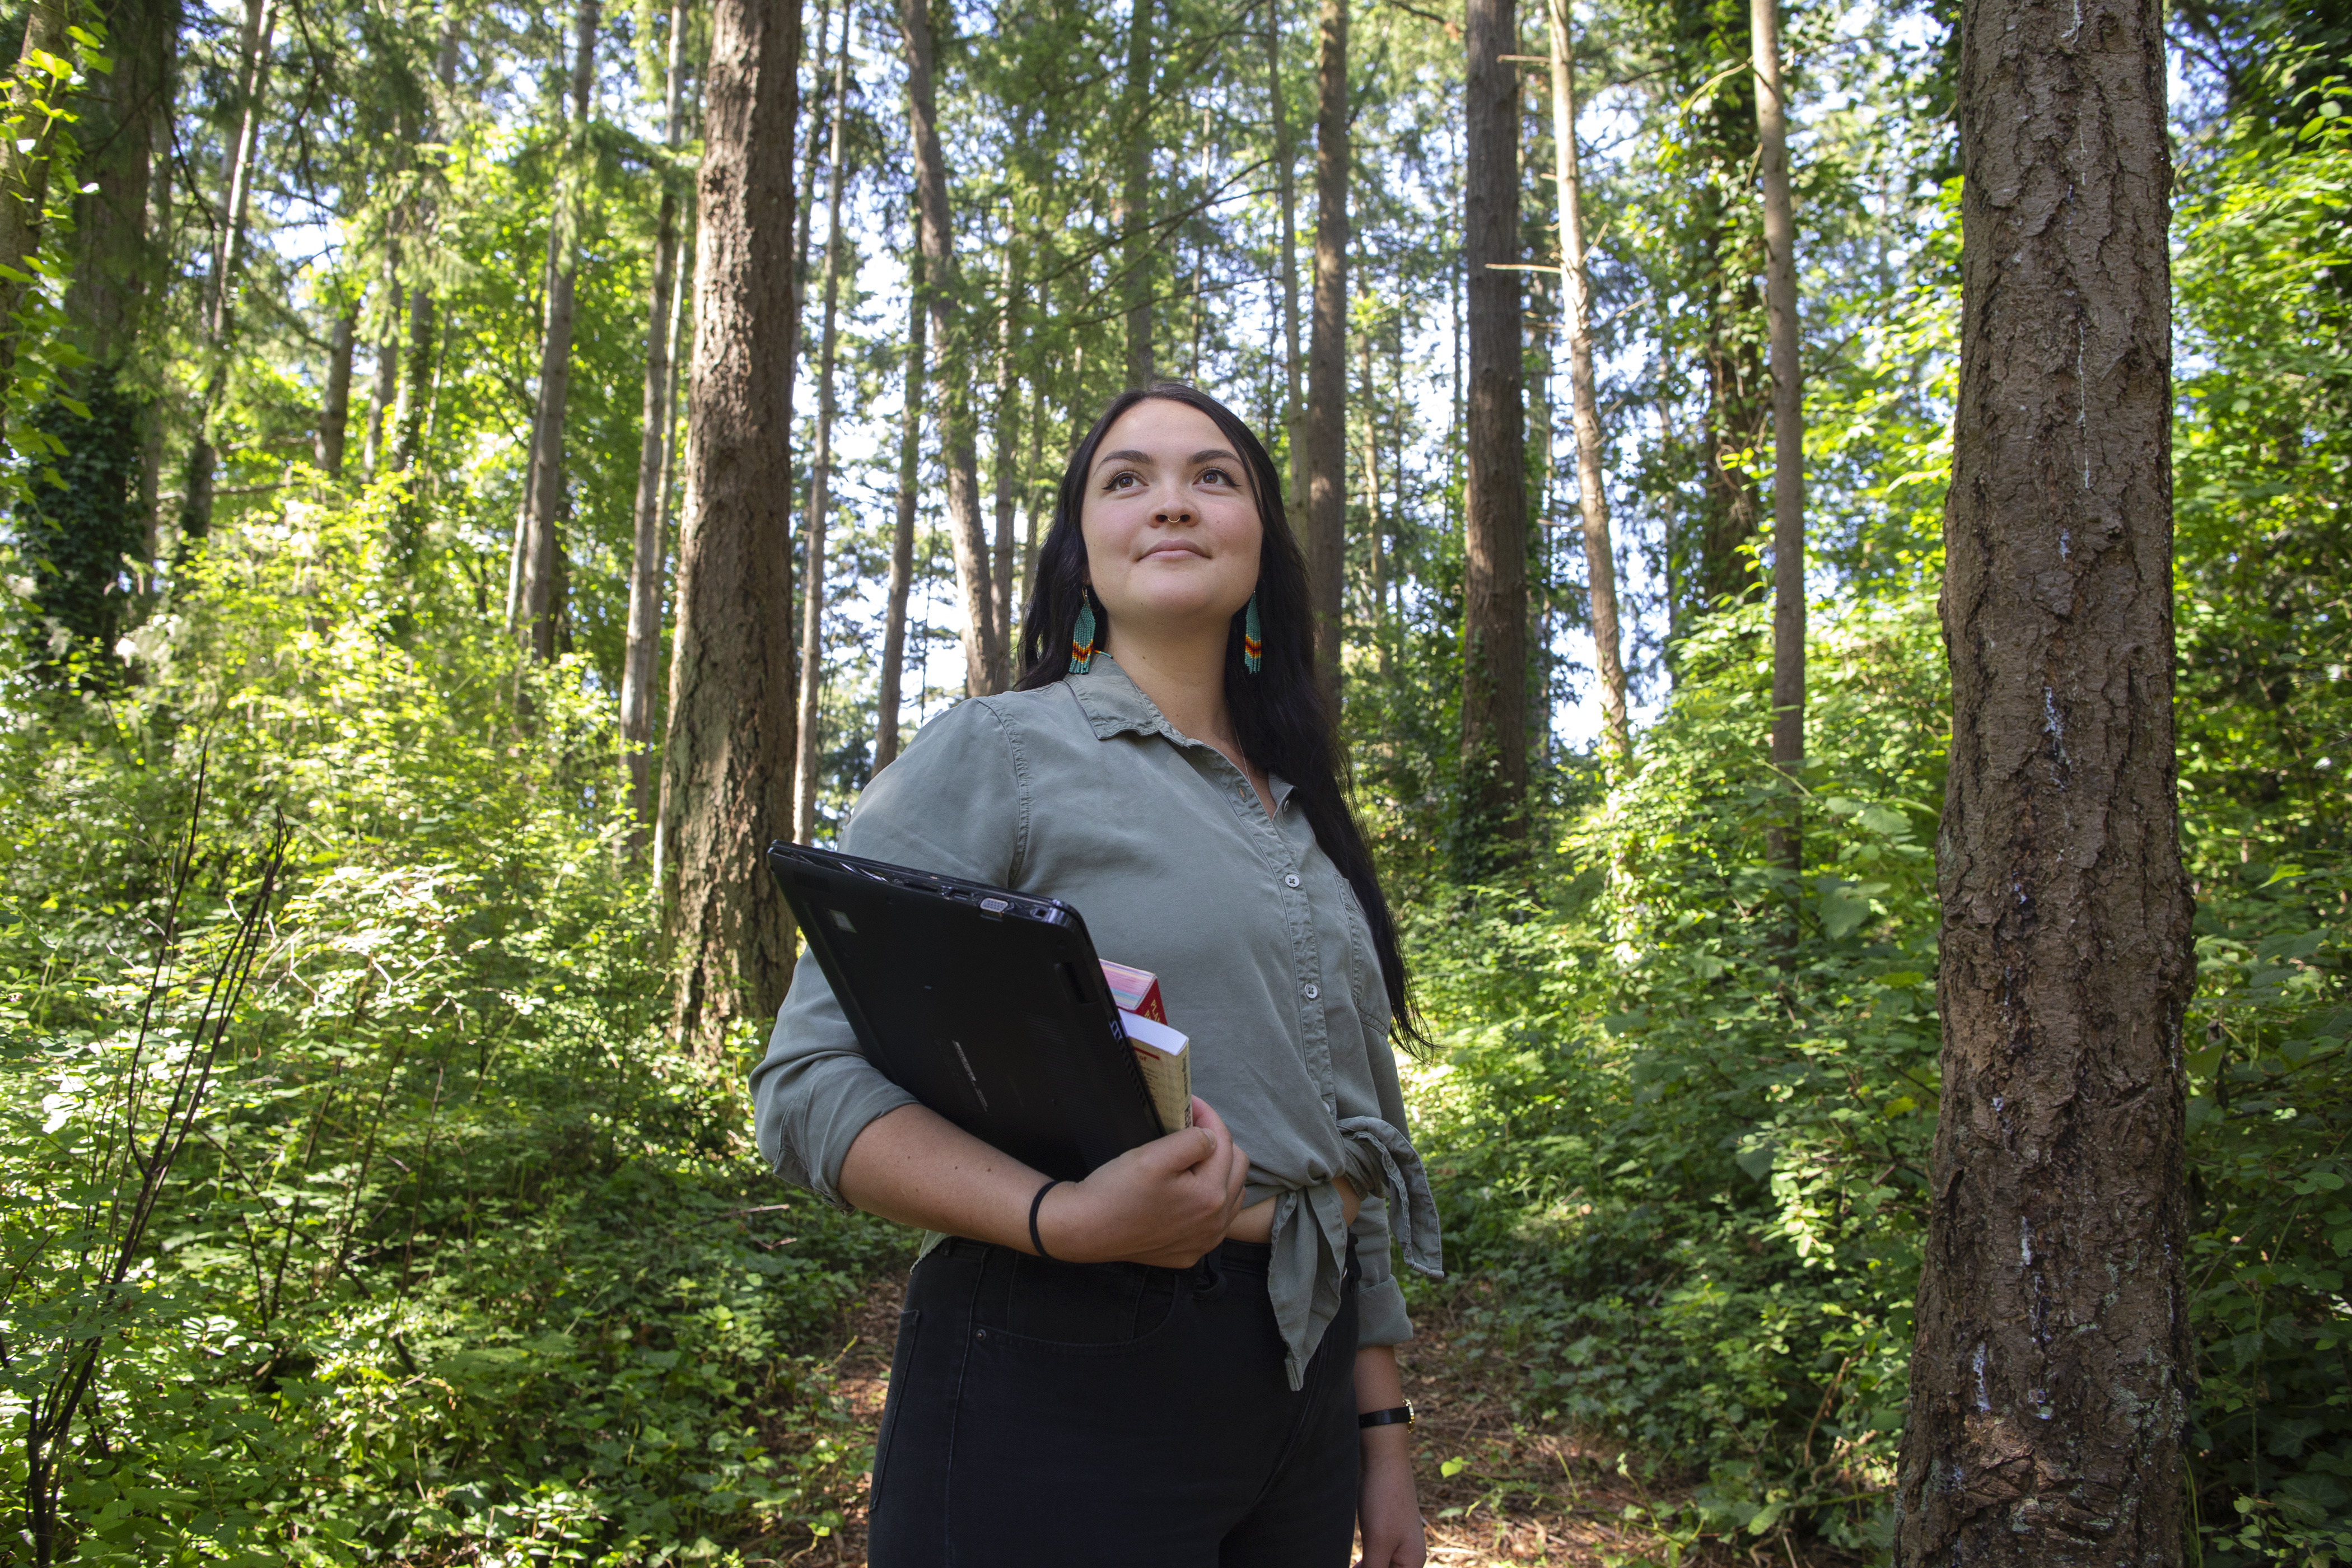 A student stands in the middle of a forest surrounded by tall trees and green foliage. The student holds a laptop and books and looks into the distance.